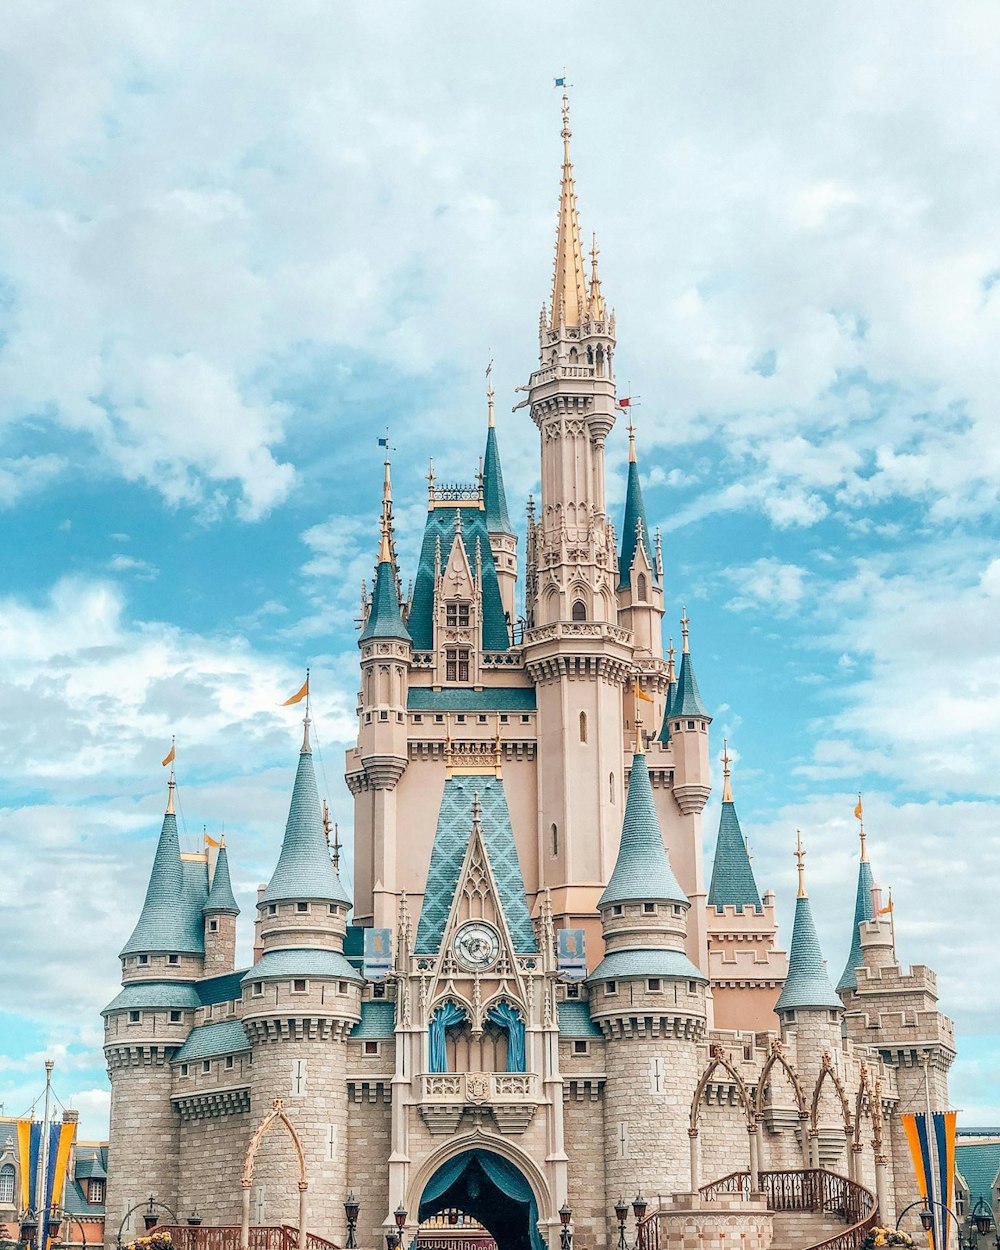 500+ Disney World Pictures | Download